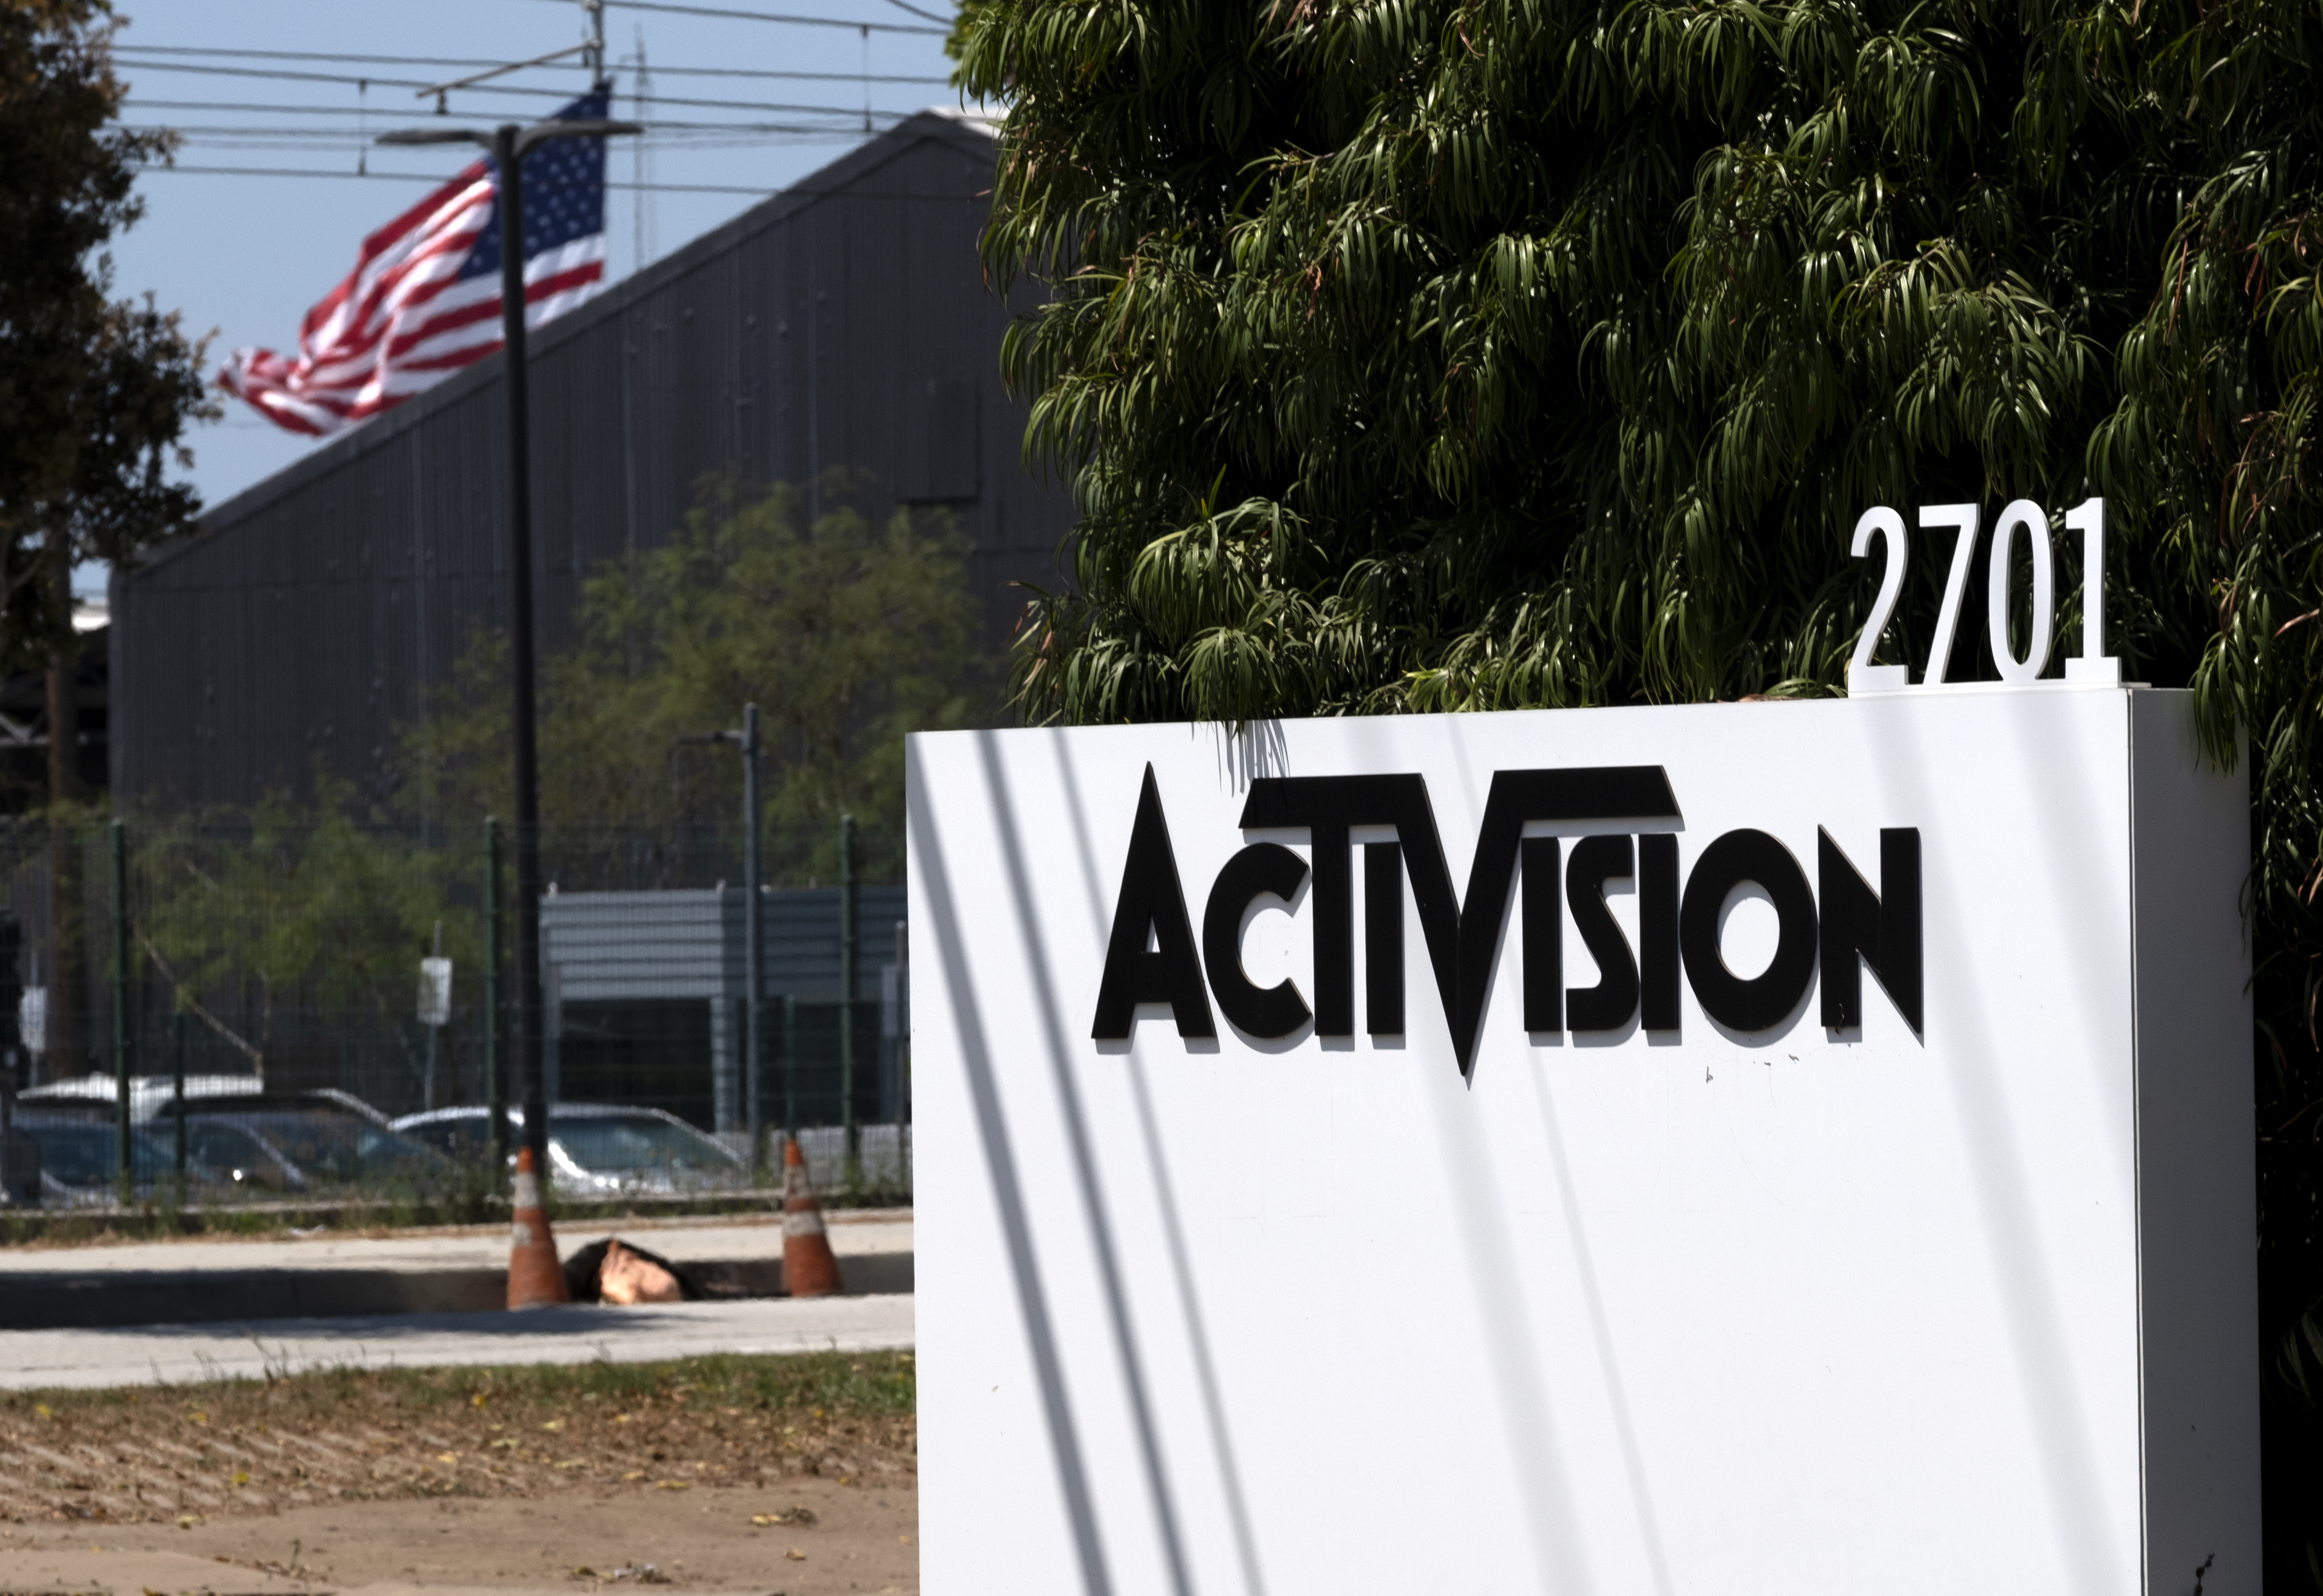 The CMA Says They're Likely to Approve the Activision Deal 